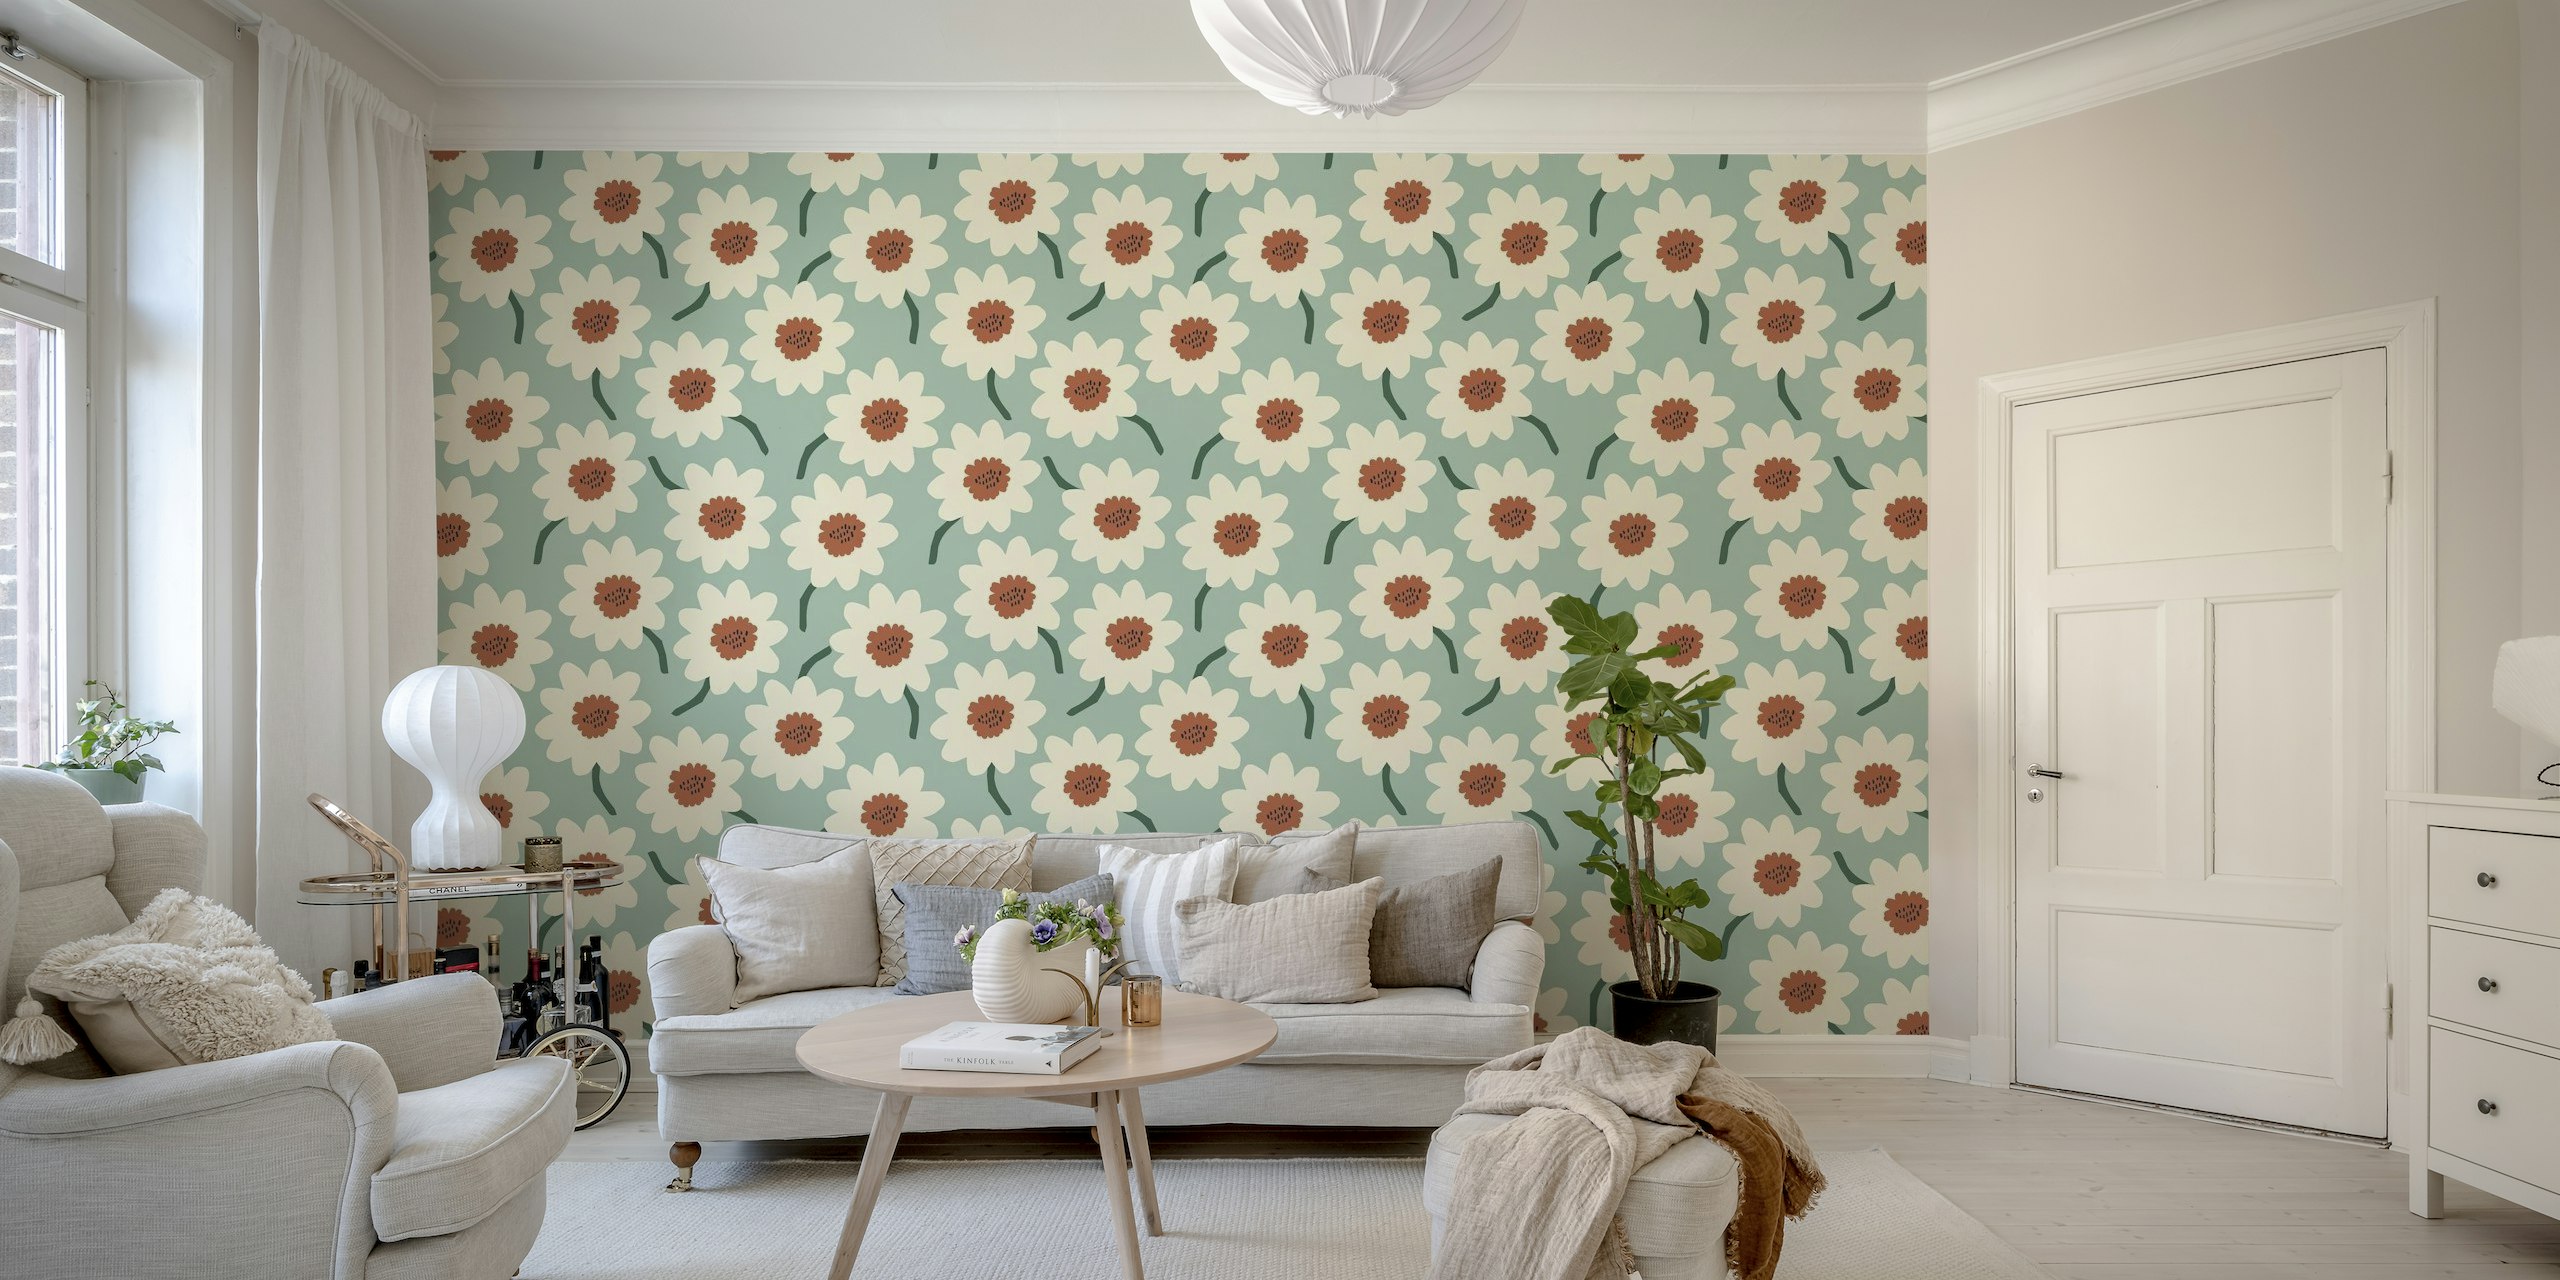 Green and rust floral wall mural pattern with daisy-like flowers